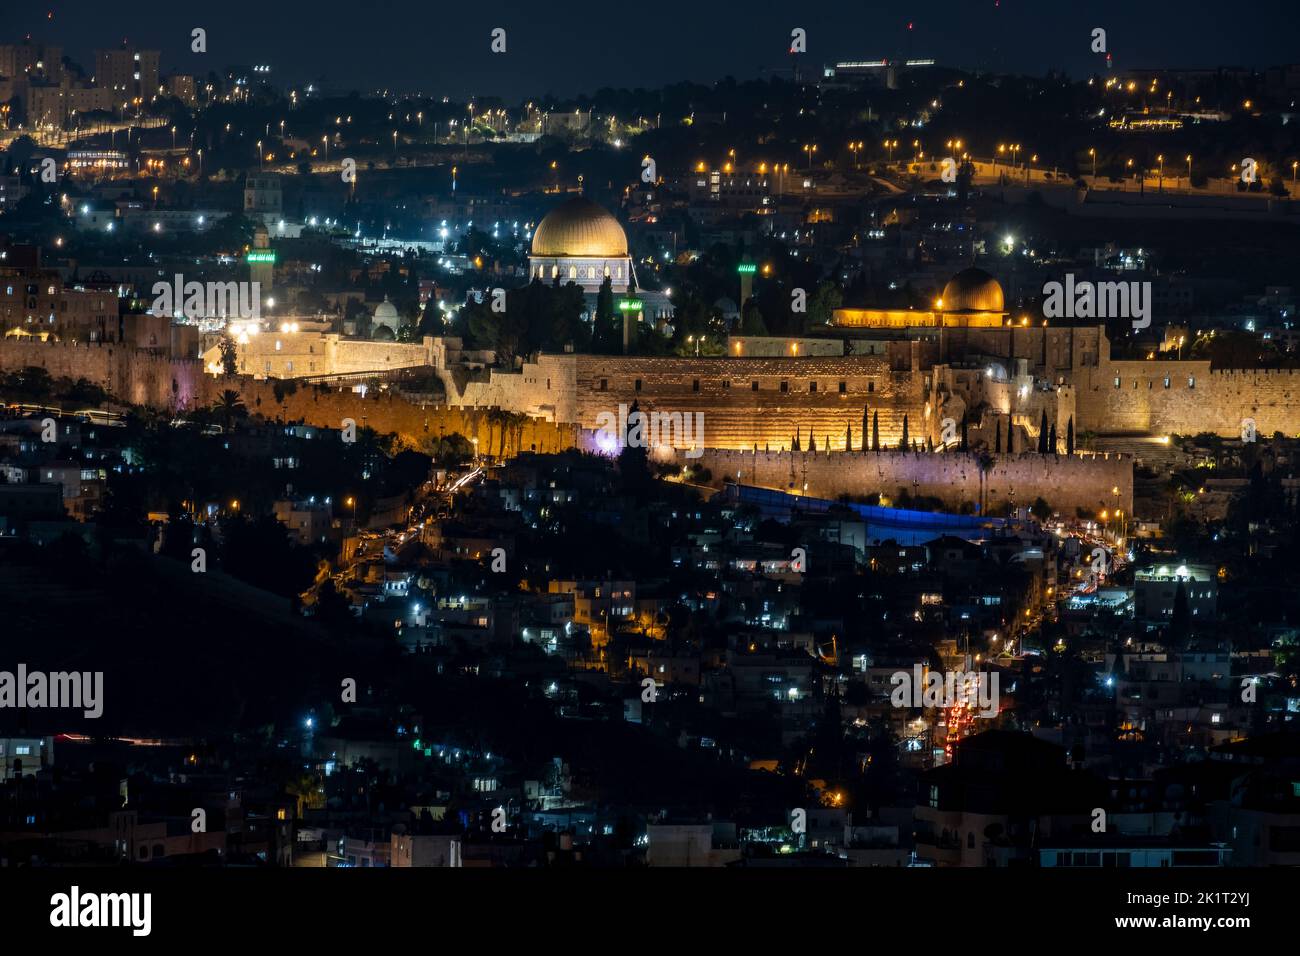 View at twilight of the Dome of the Rock and Al-Aksa Mosque built on top of the Temple Mount, known as the Al Aqsa Compound or Haram esh-Sharif across the Palestinian neighborhood of Silwan in East Jerusalem, Israel Stock Photo